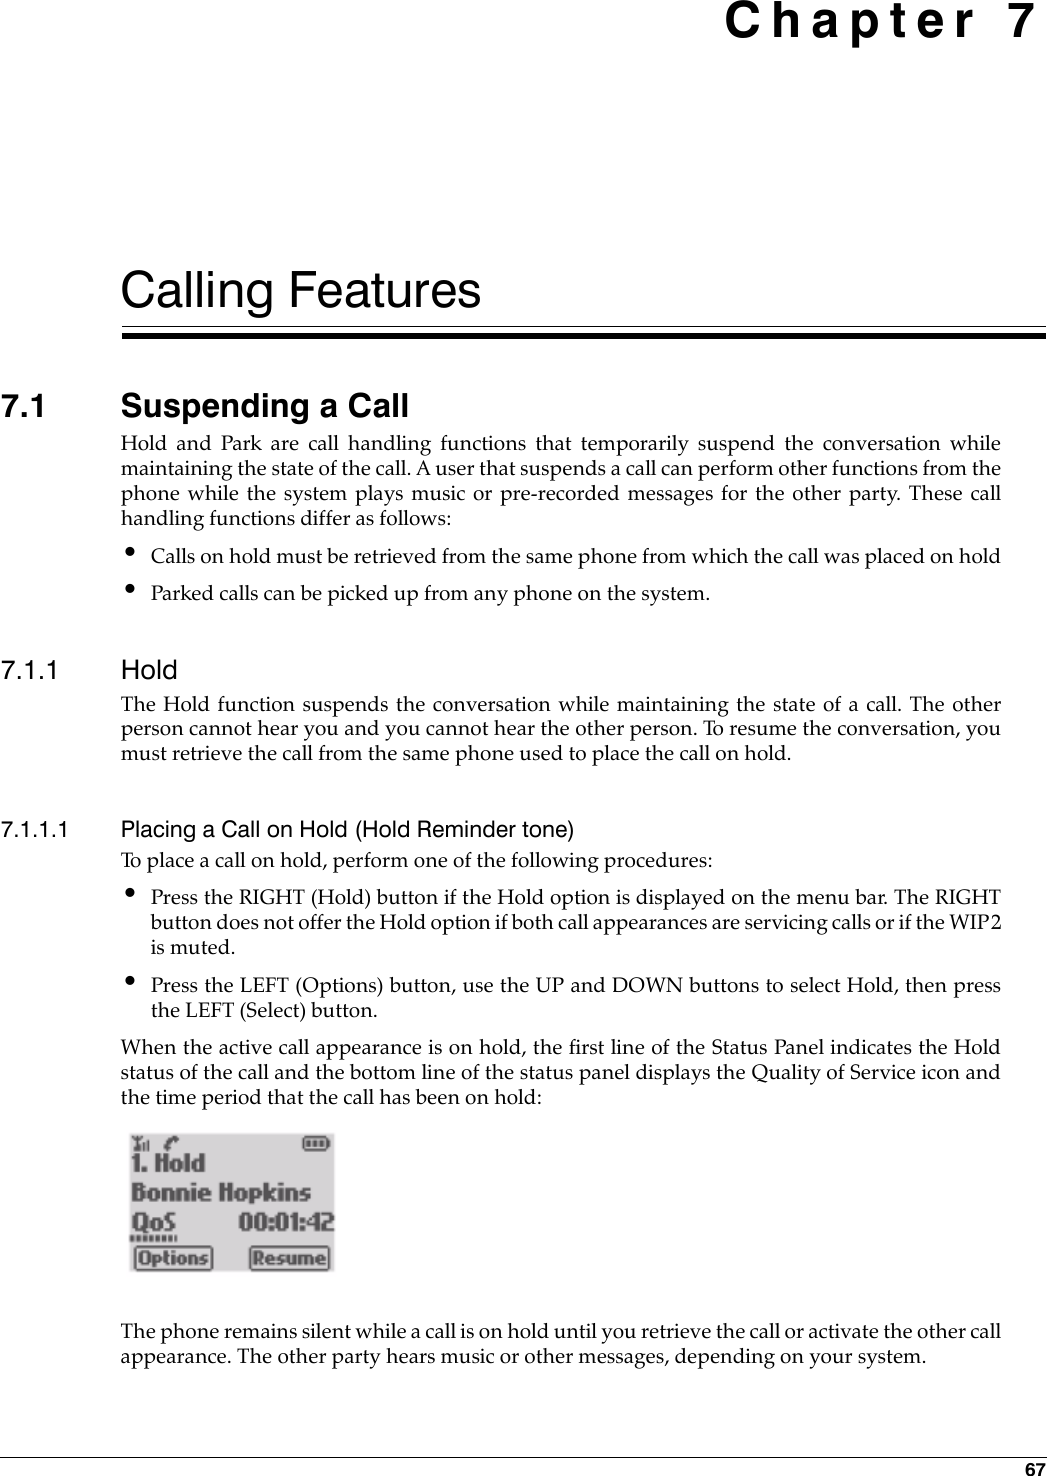 67 Chapter 7Calling Features7.1 Suspending a CallHold and Park are call handling functions that temporarily suspend the conversation whilemaintaining the state of the call. A user that suspends a call can perform other functions from thephone while the system plays music or pre-recorded messages for the other party. These callhandling functions differ as follows:•Calls on hold must be retrieved from the same phone from which the call was placed on hold•Parked calls can be picked up from any phone on the system.7.1.1 HoldThe Hold function suspends the conversation while maintaining the state of a call. The otherperson cannot hear you and you cannot hear the other person. To resume the conversation, youmust retrieve the call from the same phone used to place the call on hold. 7.1.1.1 Placing a Call on Hold (Hold Reminder tone)To place a call on hold, perform one of the following procedures: •Press the RIGHT (Hold) button if the Hold option is displayed on the menu bar. The RIGHTbutton does not offer the Hold option if both call appearances are servicing calls or if the WIP2is muted.•Press the LEFT (Options) button, use the UP and DOWN buttons to select Hold, then pressthe LEFT (Select) button.When the active call appearance is on hold, the first line of the Status Panel indicates the Holdstatus of the call and the bottom line of the status panel displays the Quality of Service icon andthe time period that the call has been on hold:The phone remains silent while a call is on hold until you retrieve the call or activate the other callappearance. The other party hears music or other messages, depending on your system.